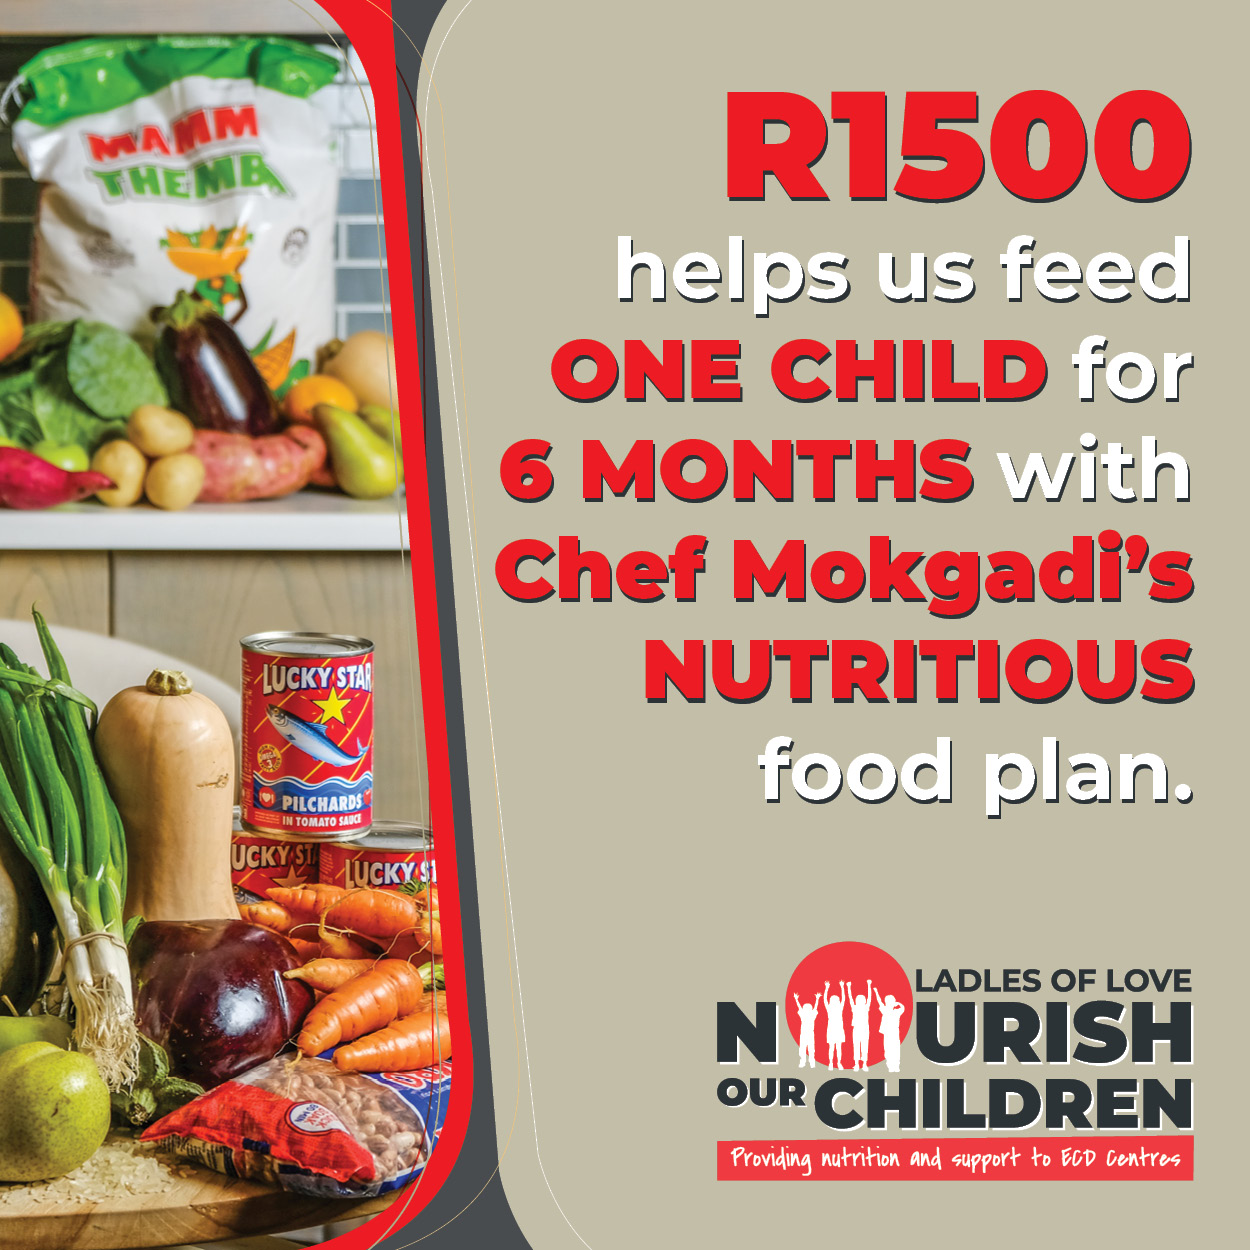 Invest in a child's future with just R1500! Your donation will provide two nutritious meals a day for six months, giving them the nourishment they need to grow and thrive. Join us in making a difference in the lives of vulnerable children today.